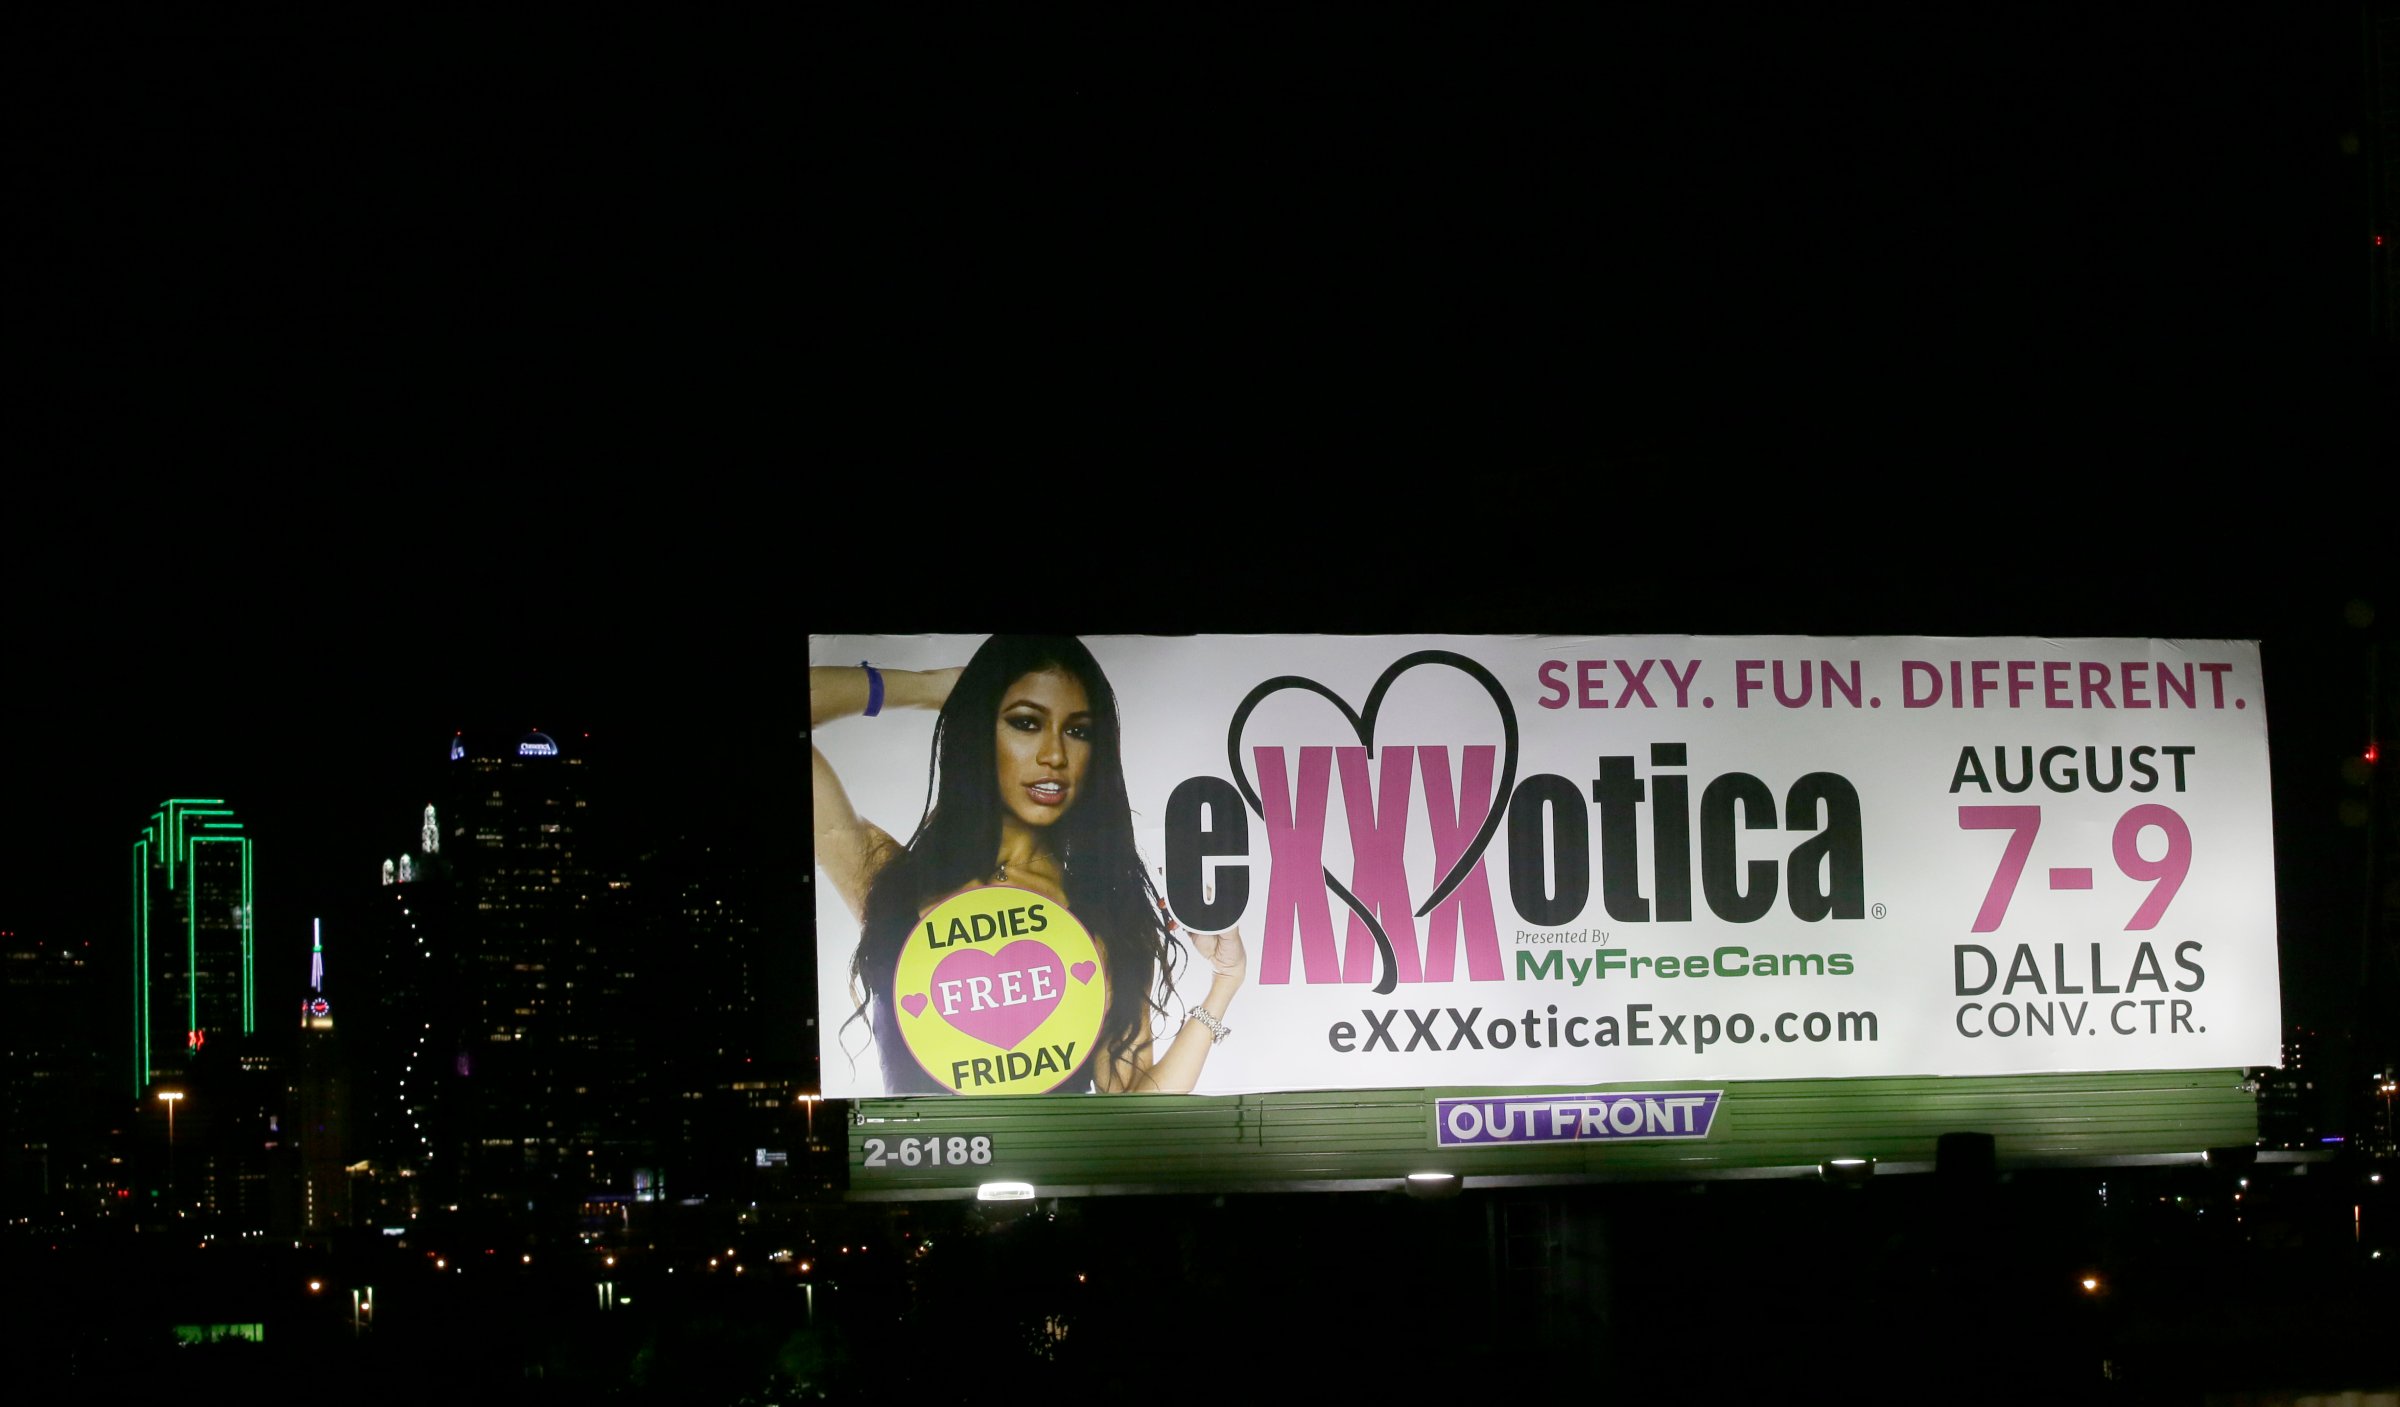 A billboard sign advertises the Exxxotica expo in Dallas, July 31, 2015.